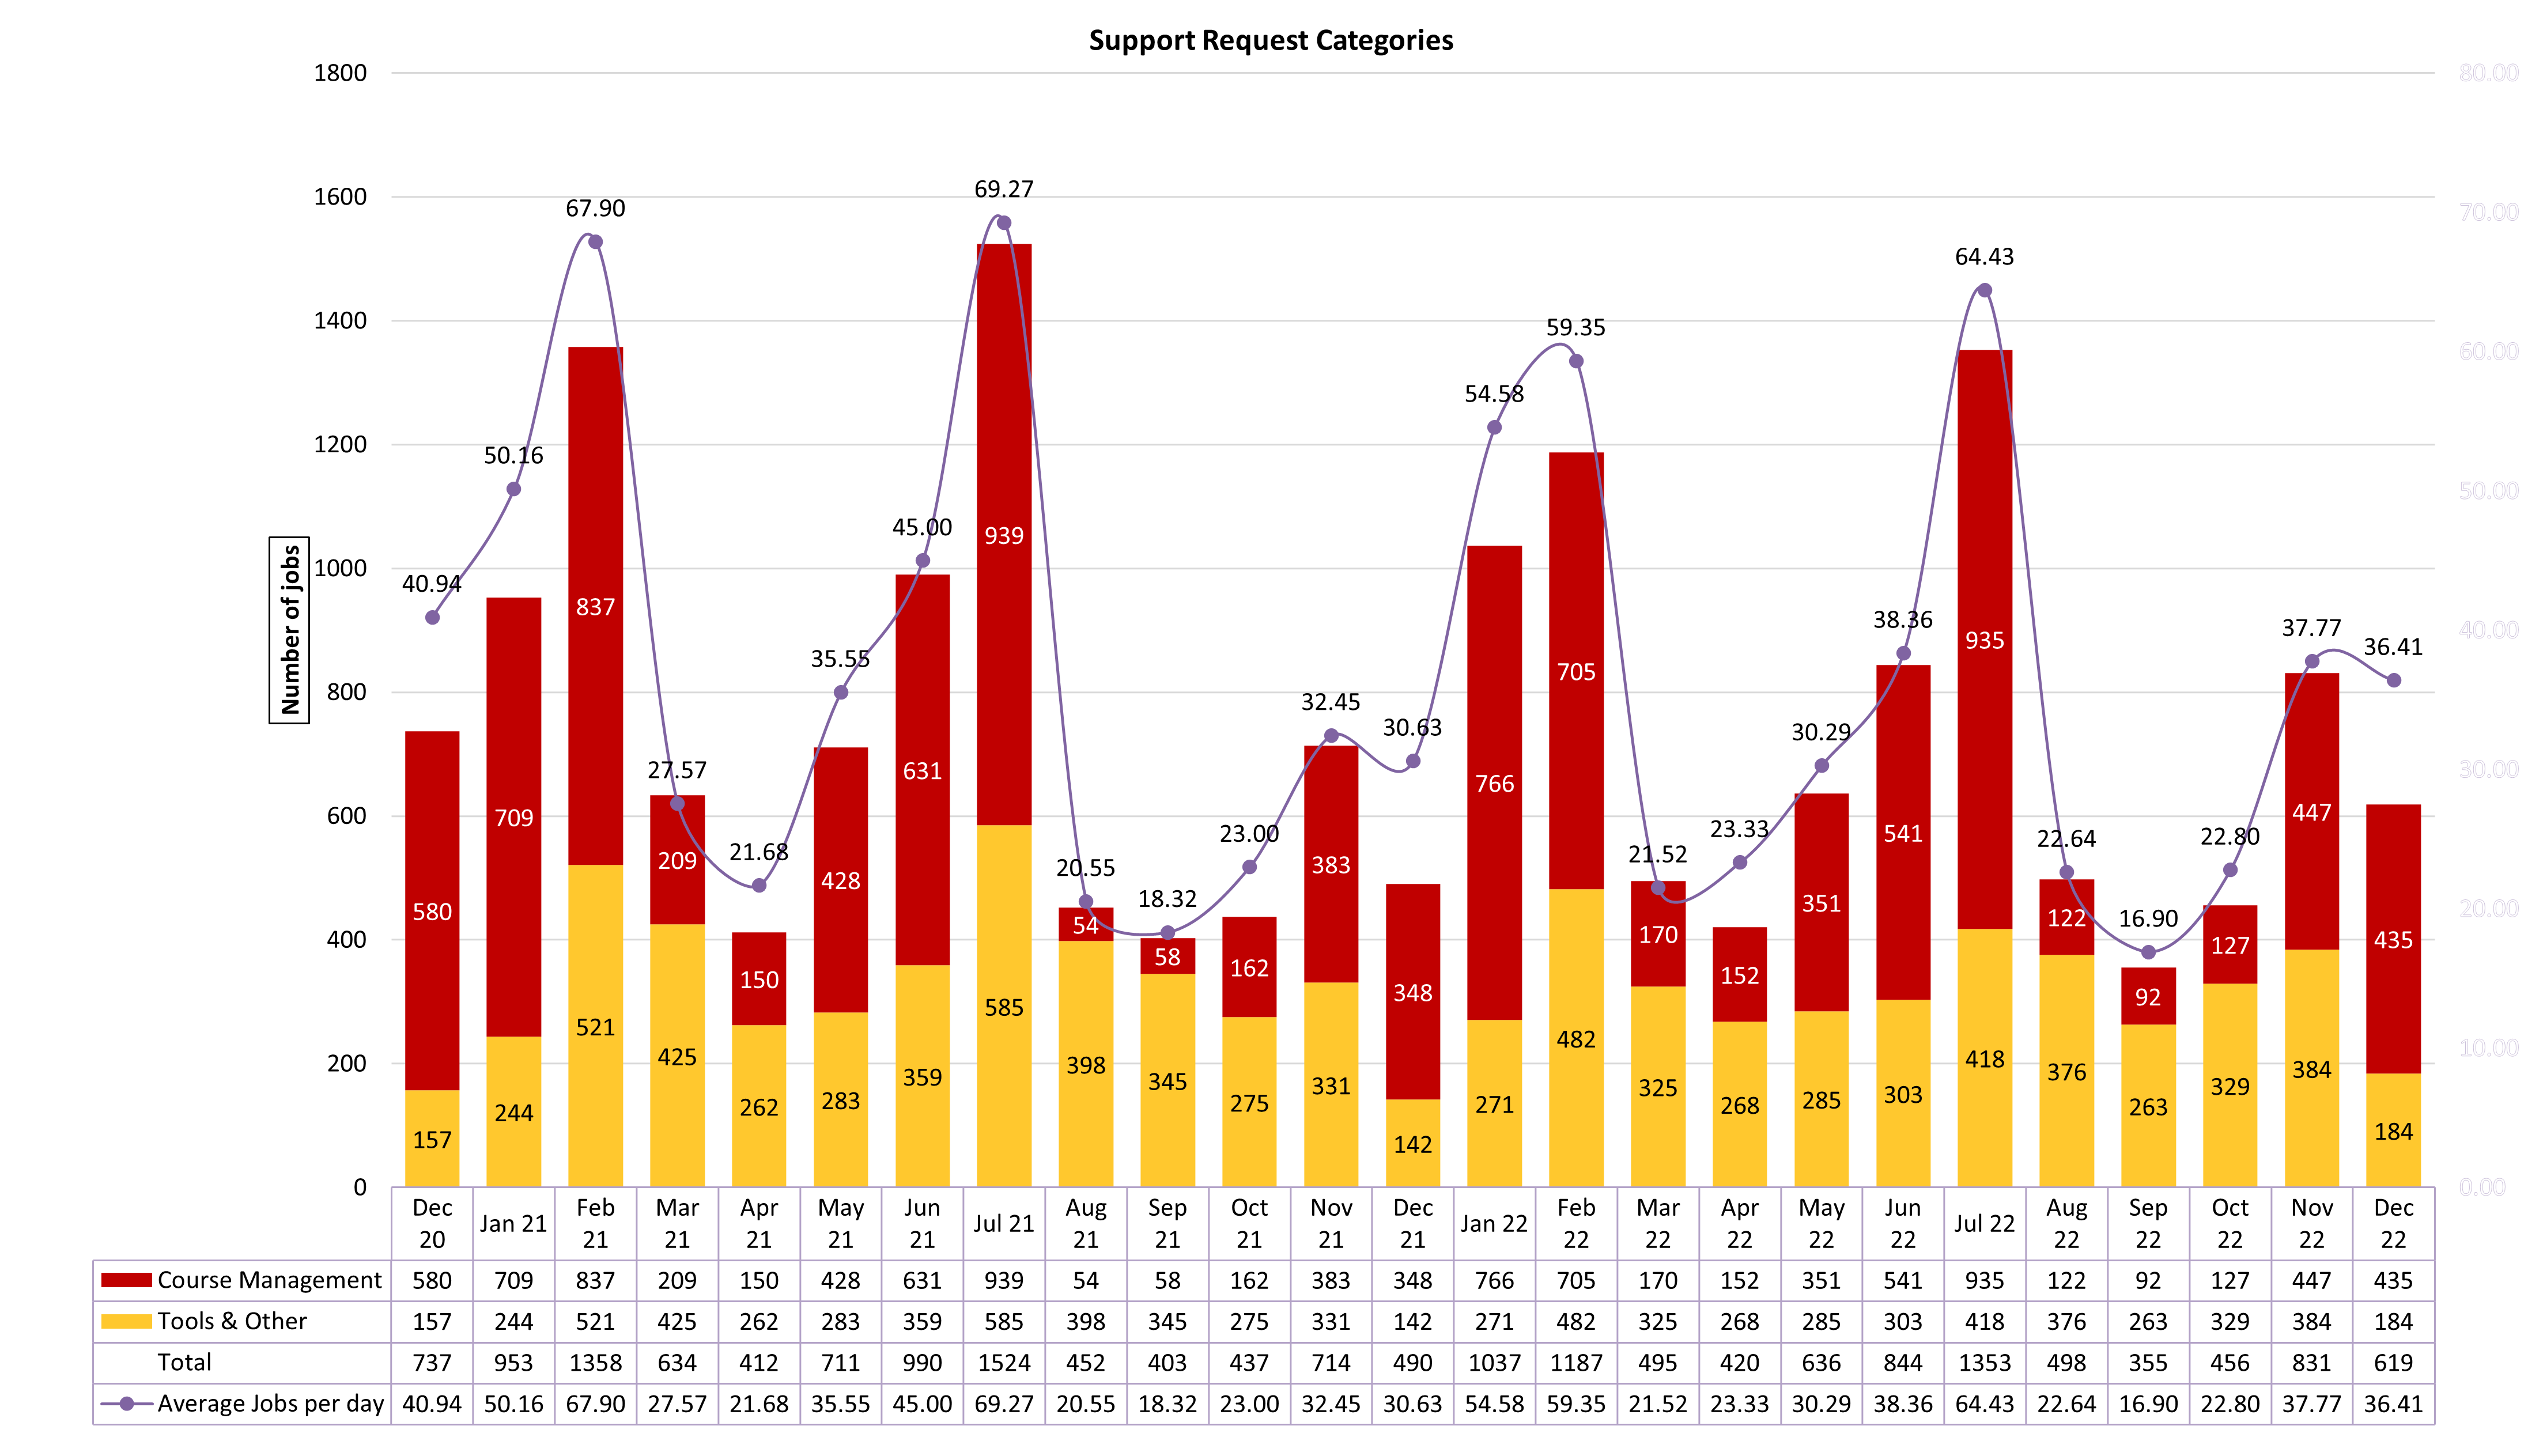 Chart of Support Request Categories from December 2020 to December 2022